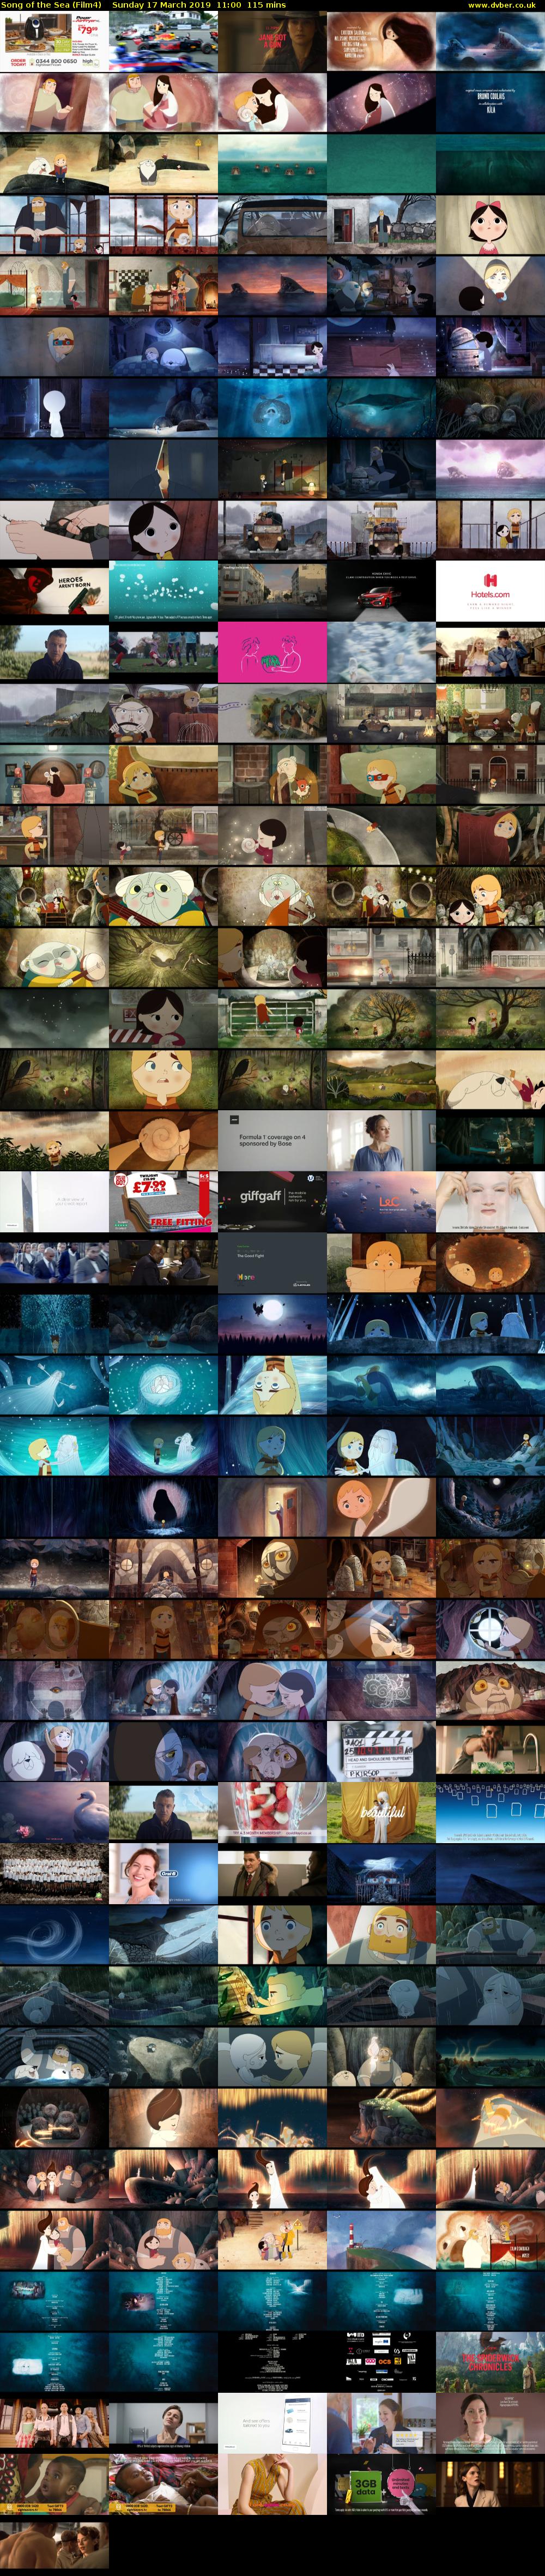 Song of the Sea (Film4) Sunday 17 March 2019 11:00 - 12:55